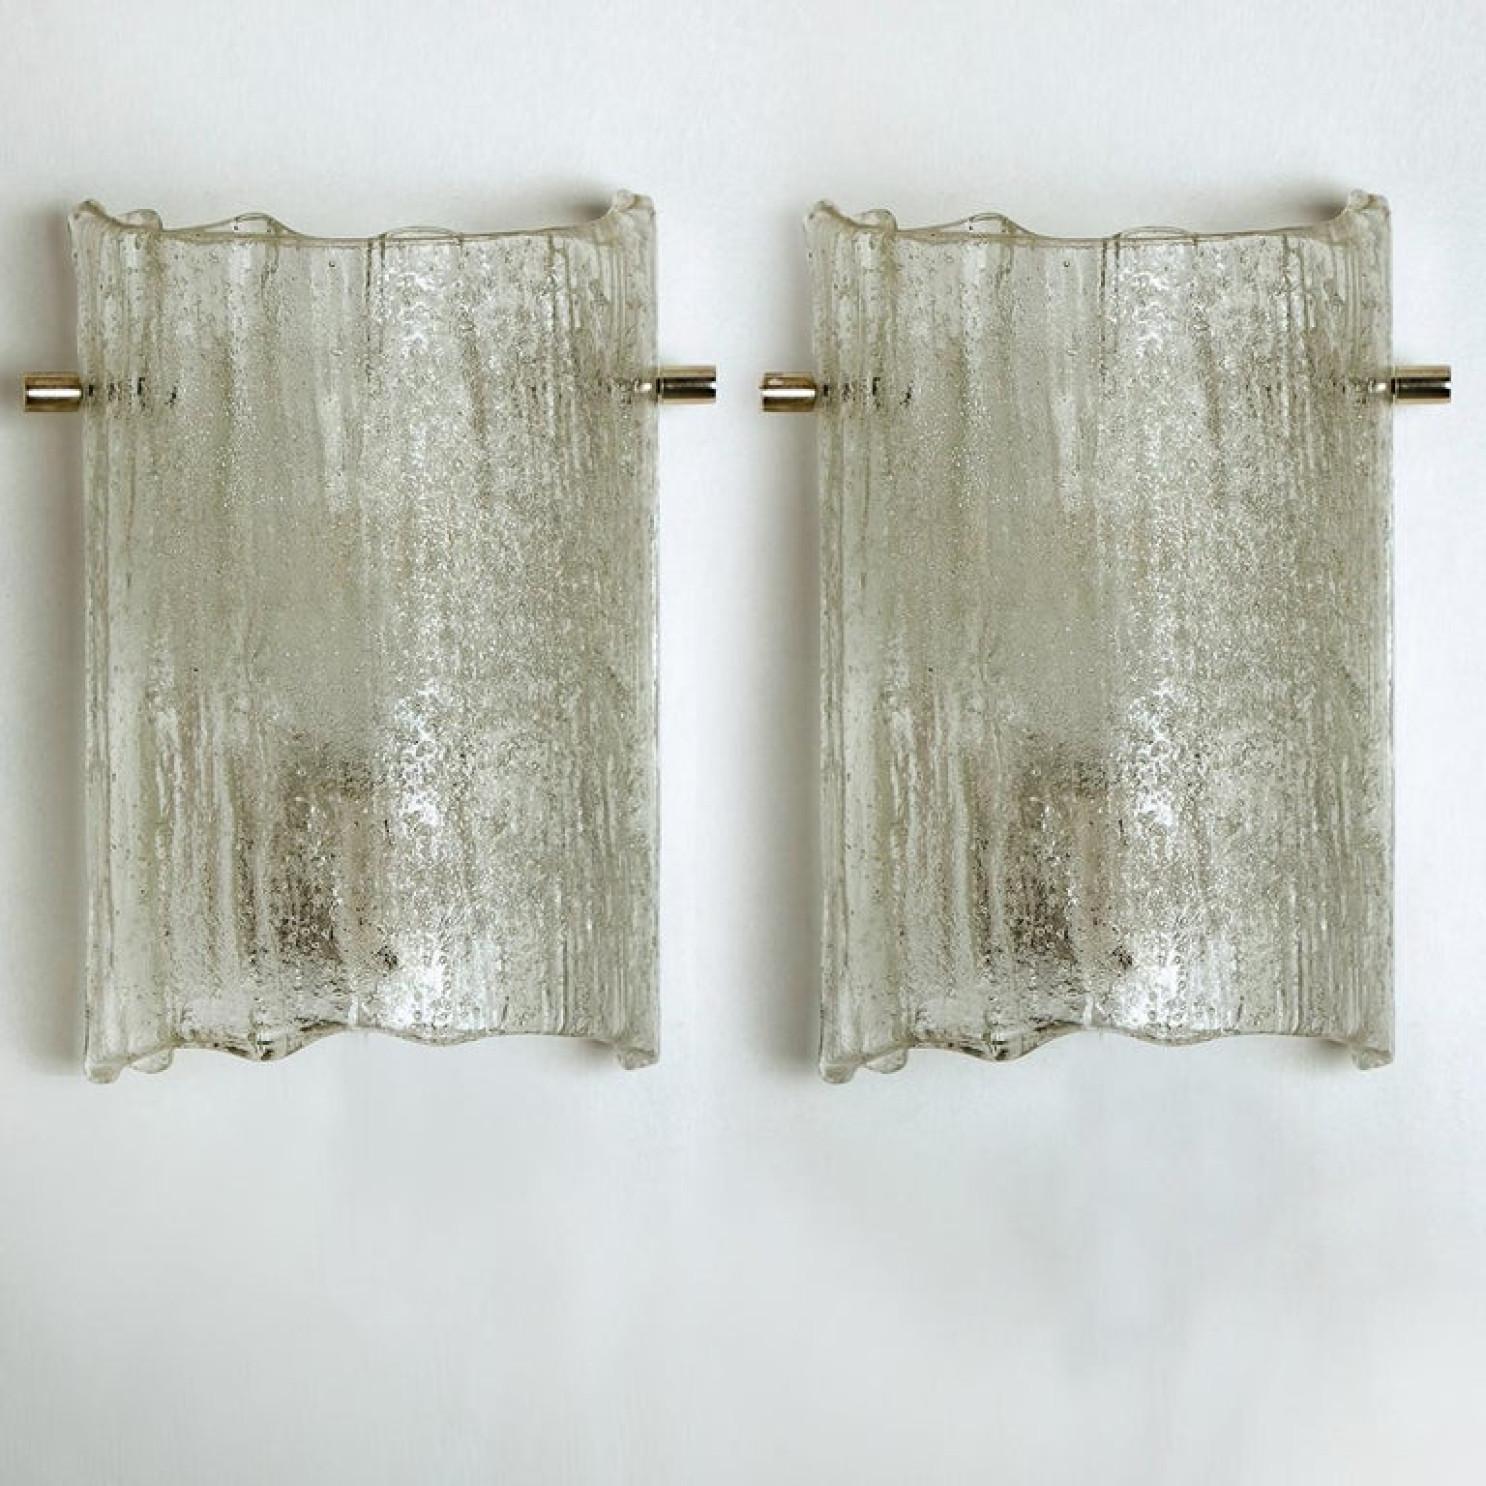 1 of the 10 Massive Glass Wall Light Fixtures by J.T. Kalmar, 1960 For Sale 2